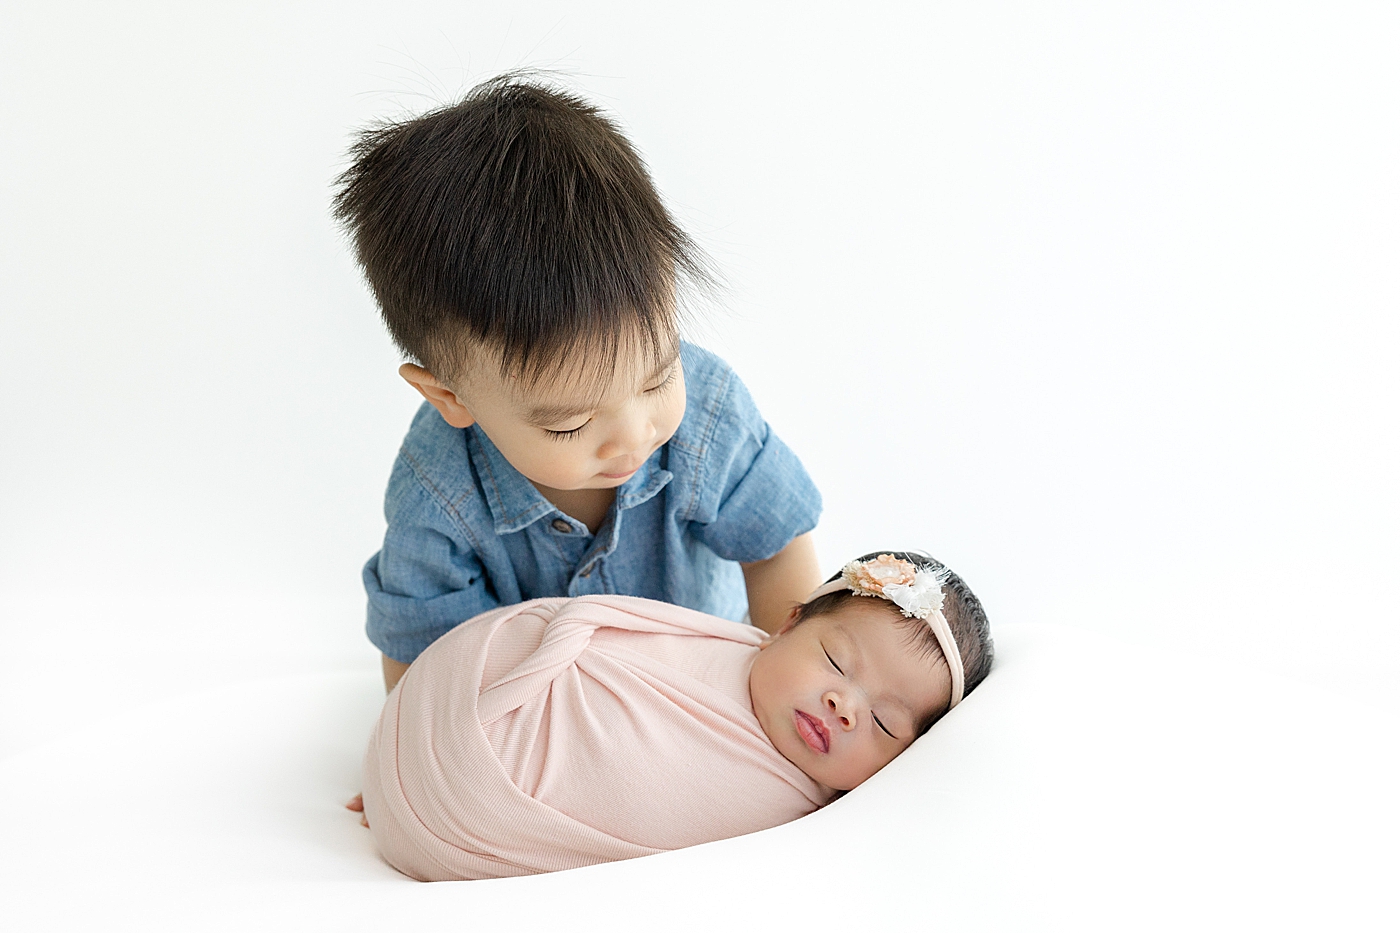 Big brother looking at his newborn baby sister | Image by Sana Ahmed